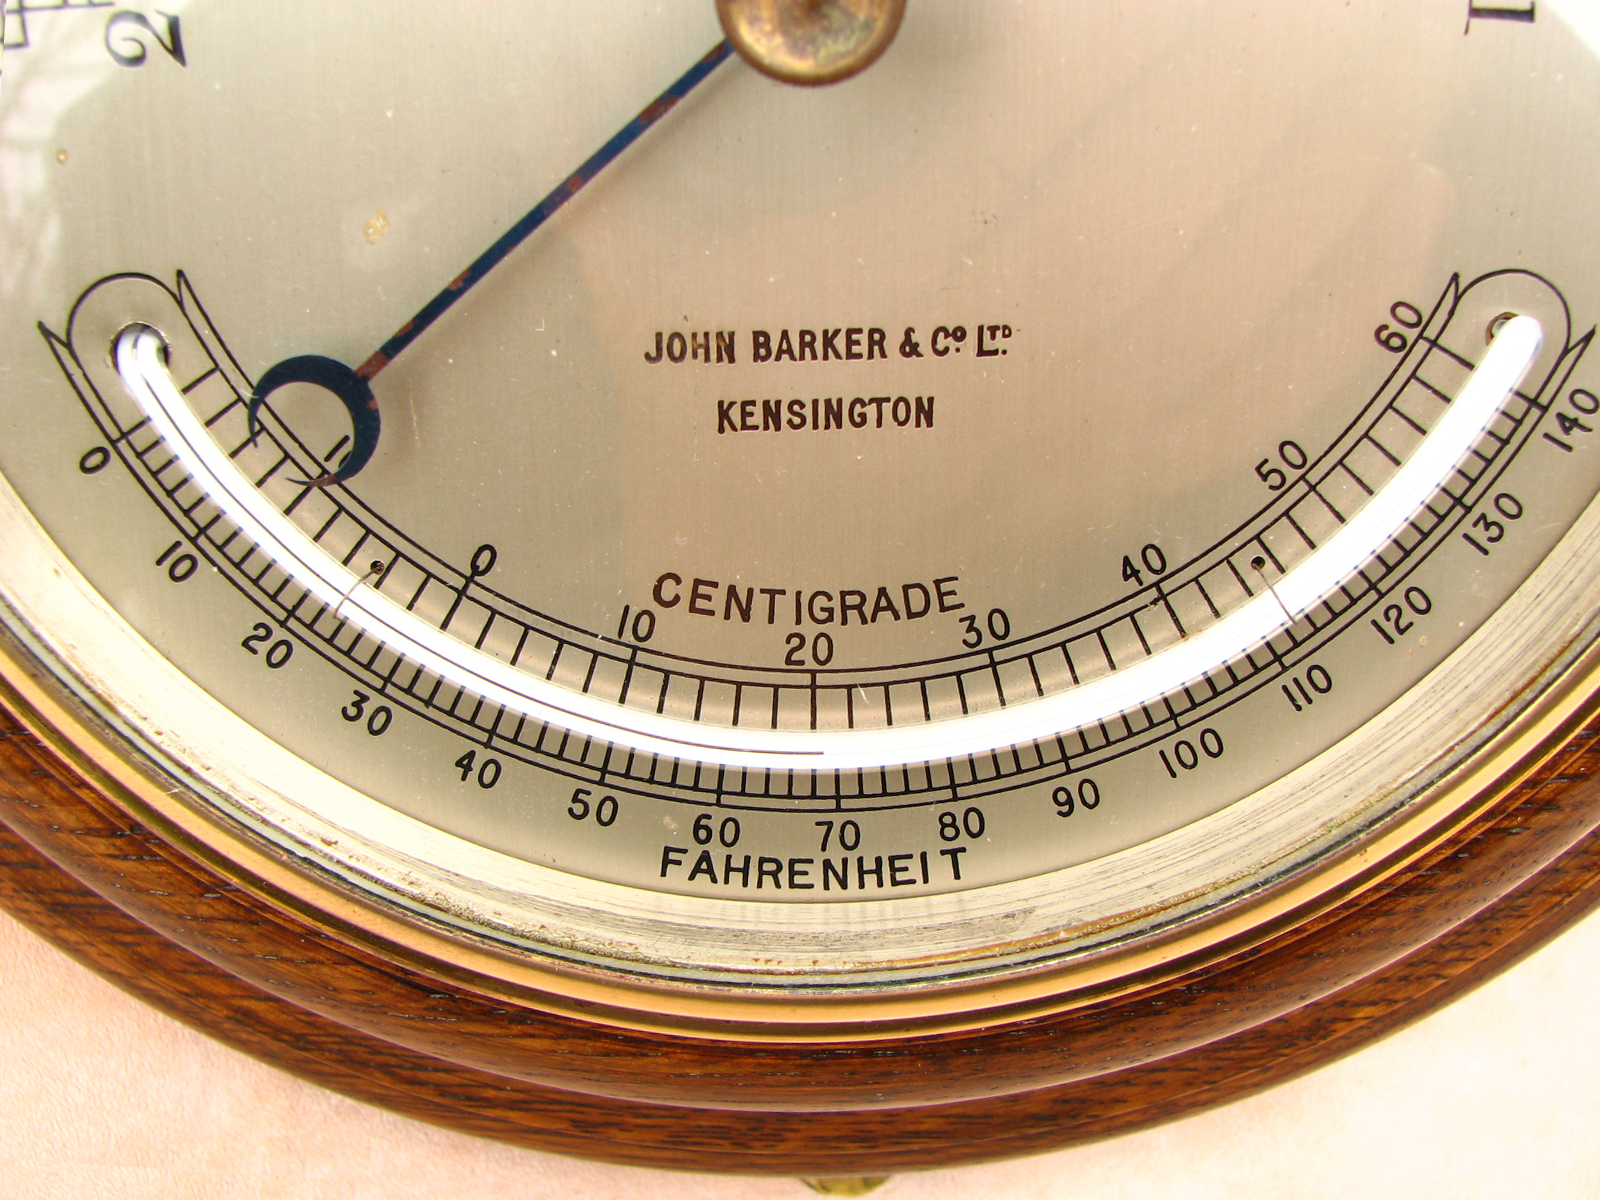 Antique John Barker marine aneroid barometer with curved thermometer